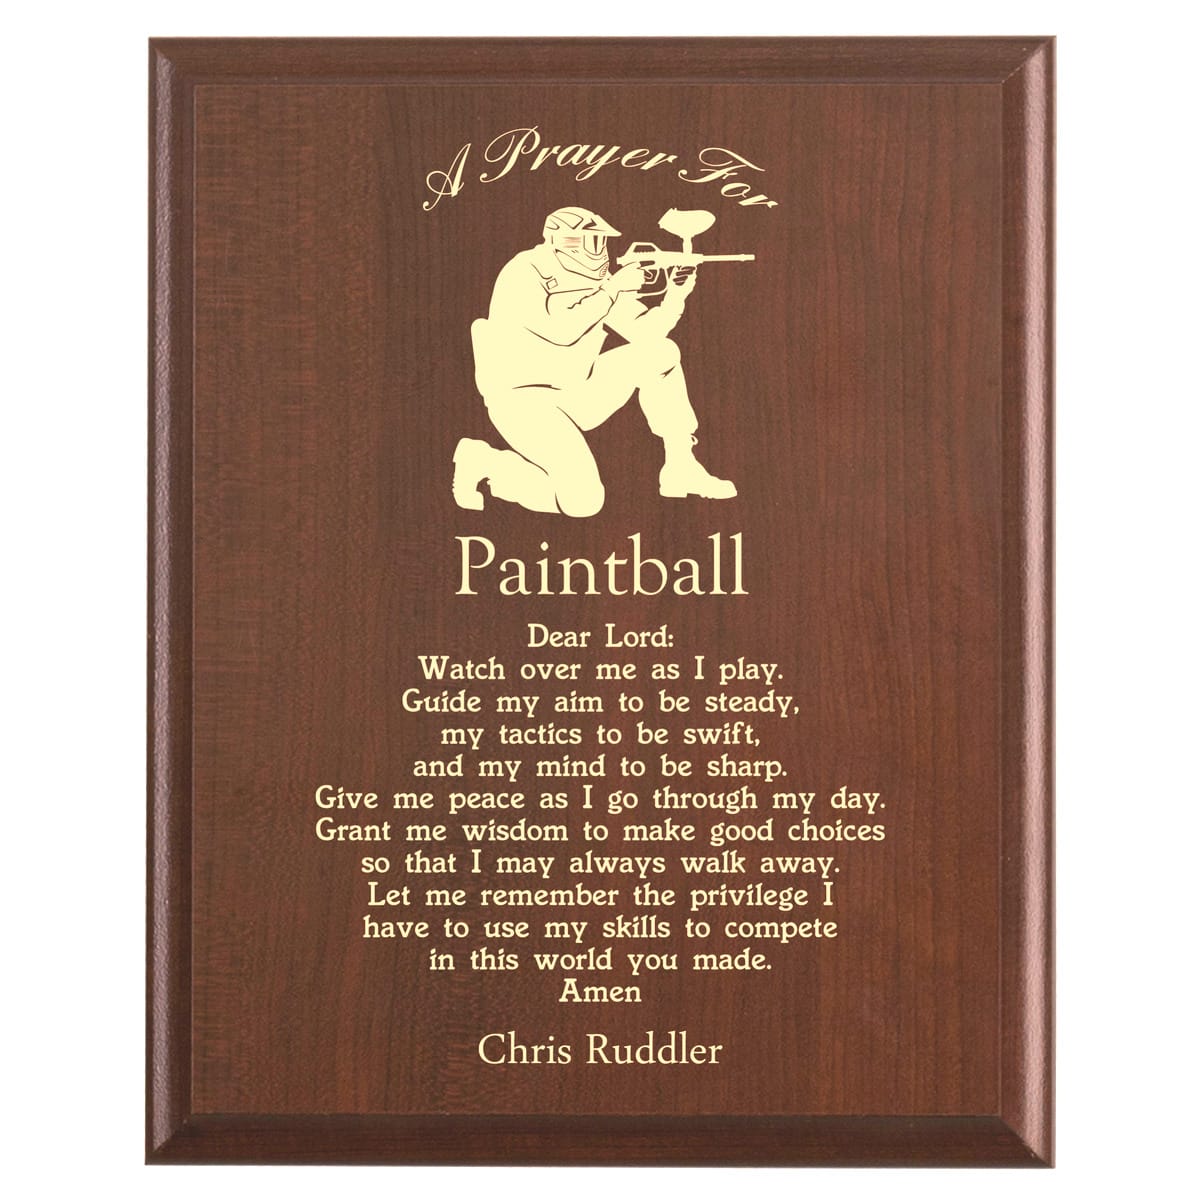 Plaque photo: Paintball Prayer Plaque design with free personalization. Wood style finish with customized text.